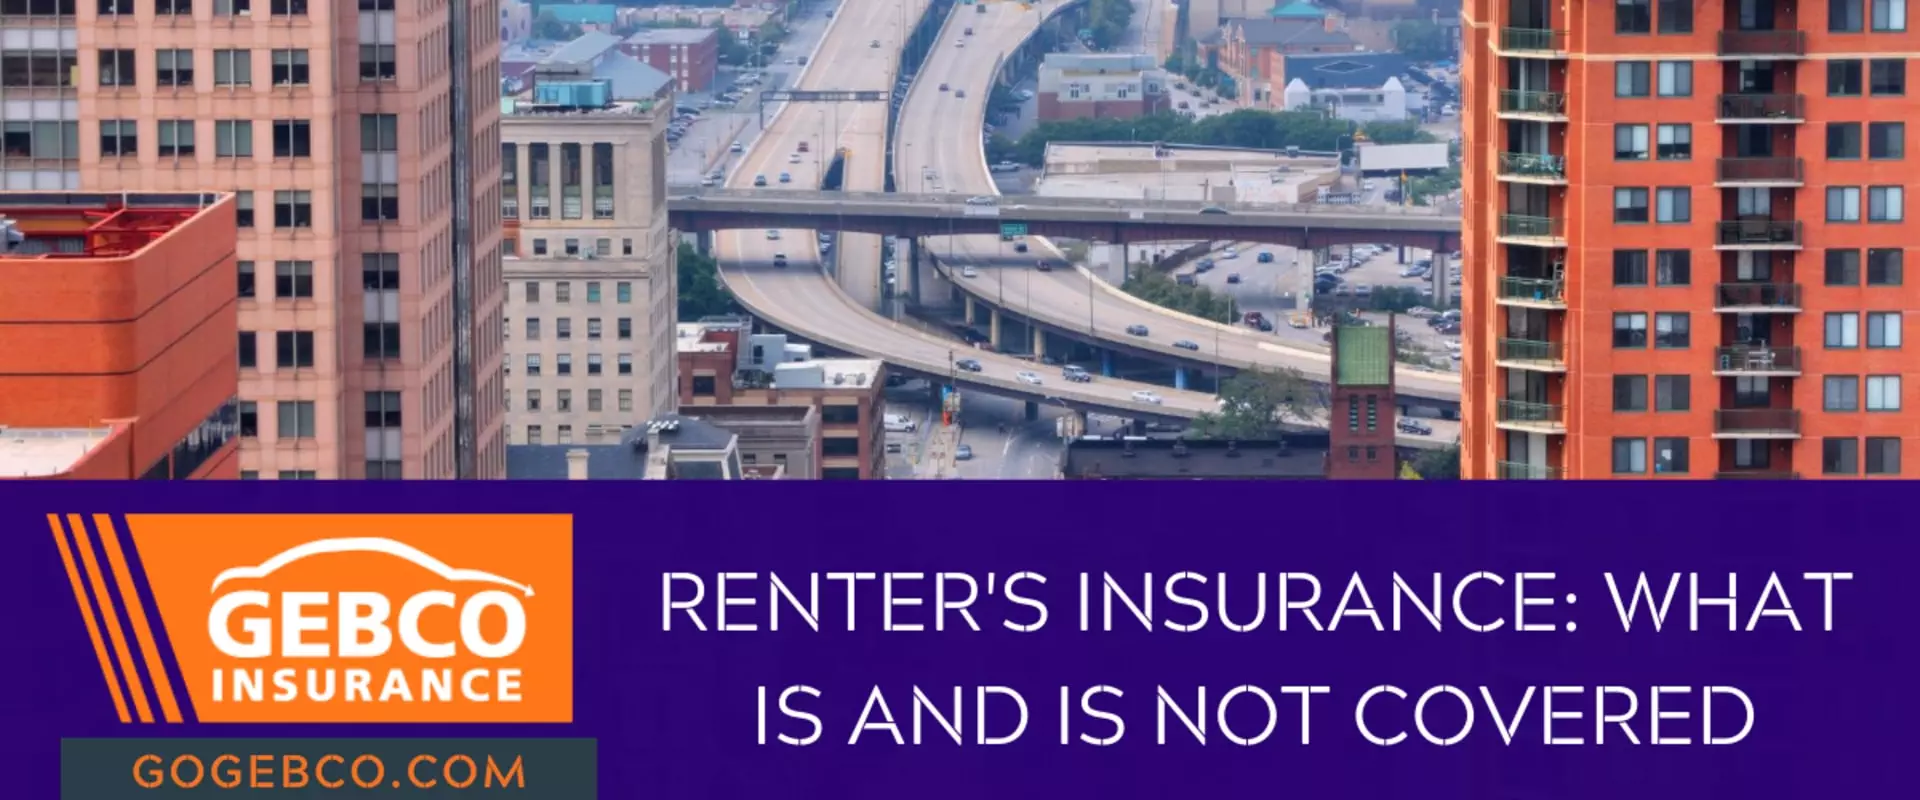 What catastrophes are covered by renter’s insurance?